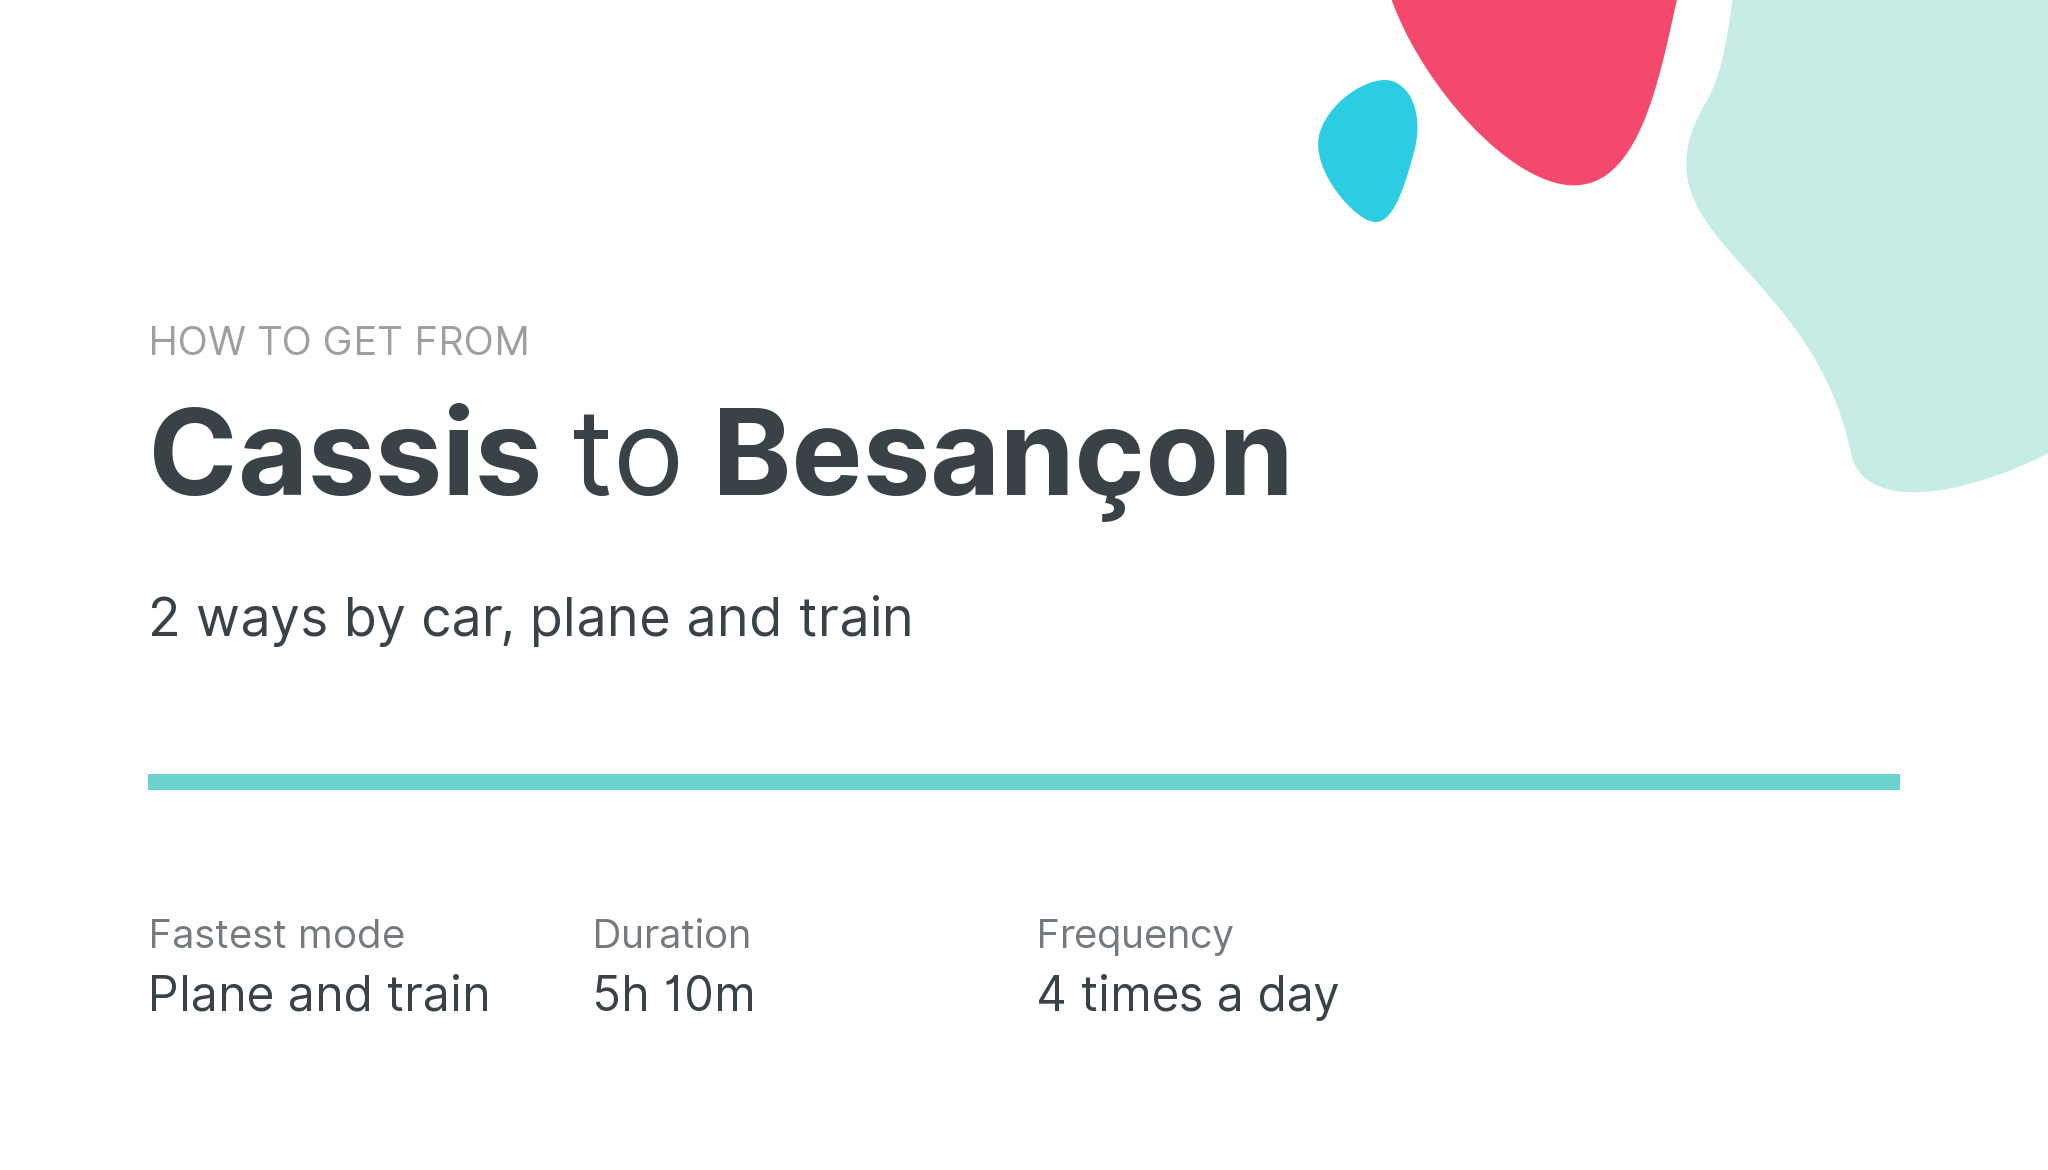 How do I get from Cassis to Besançon